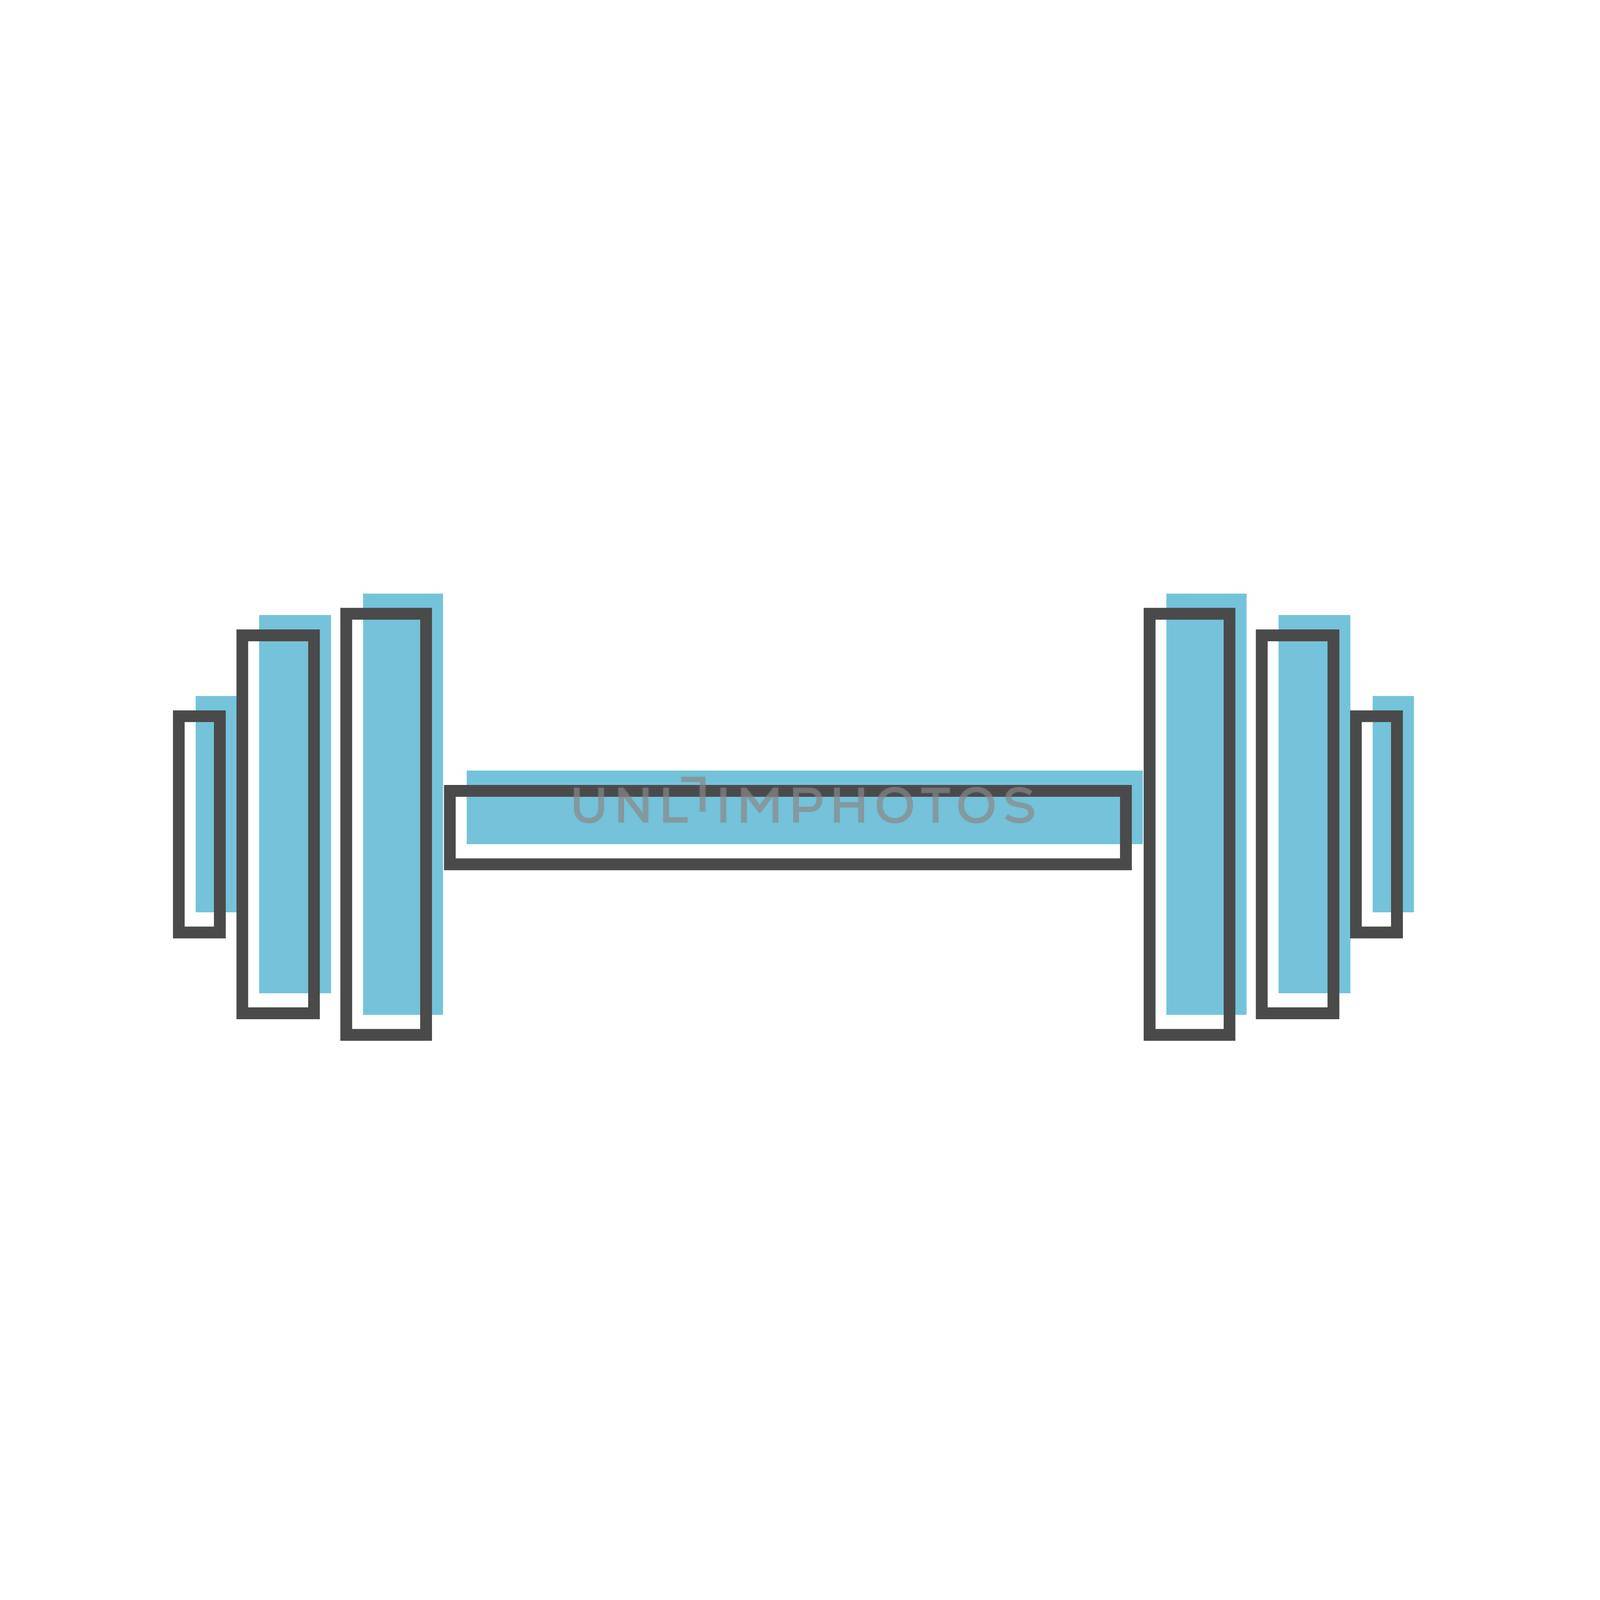 Illustration vector graphic of dumbbell. Simple flat icon on white background